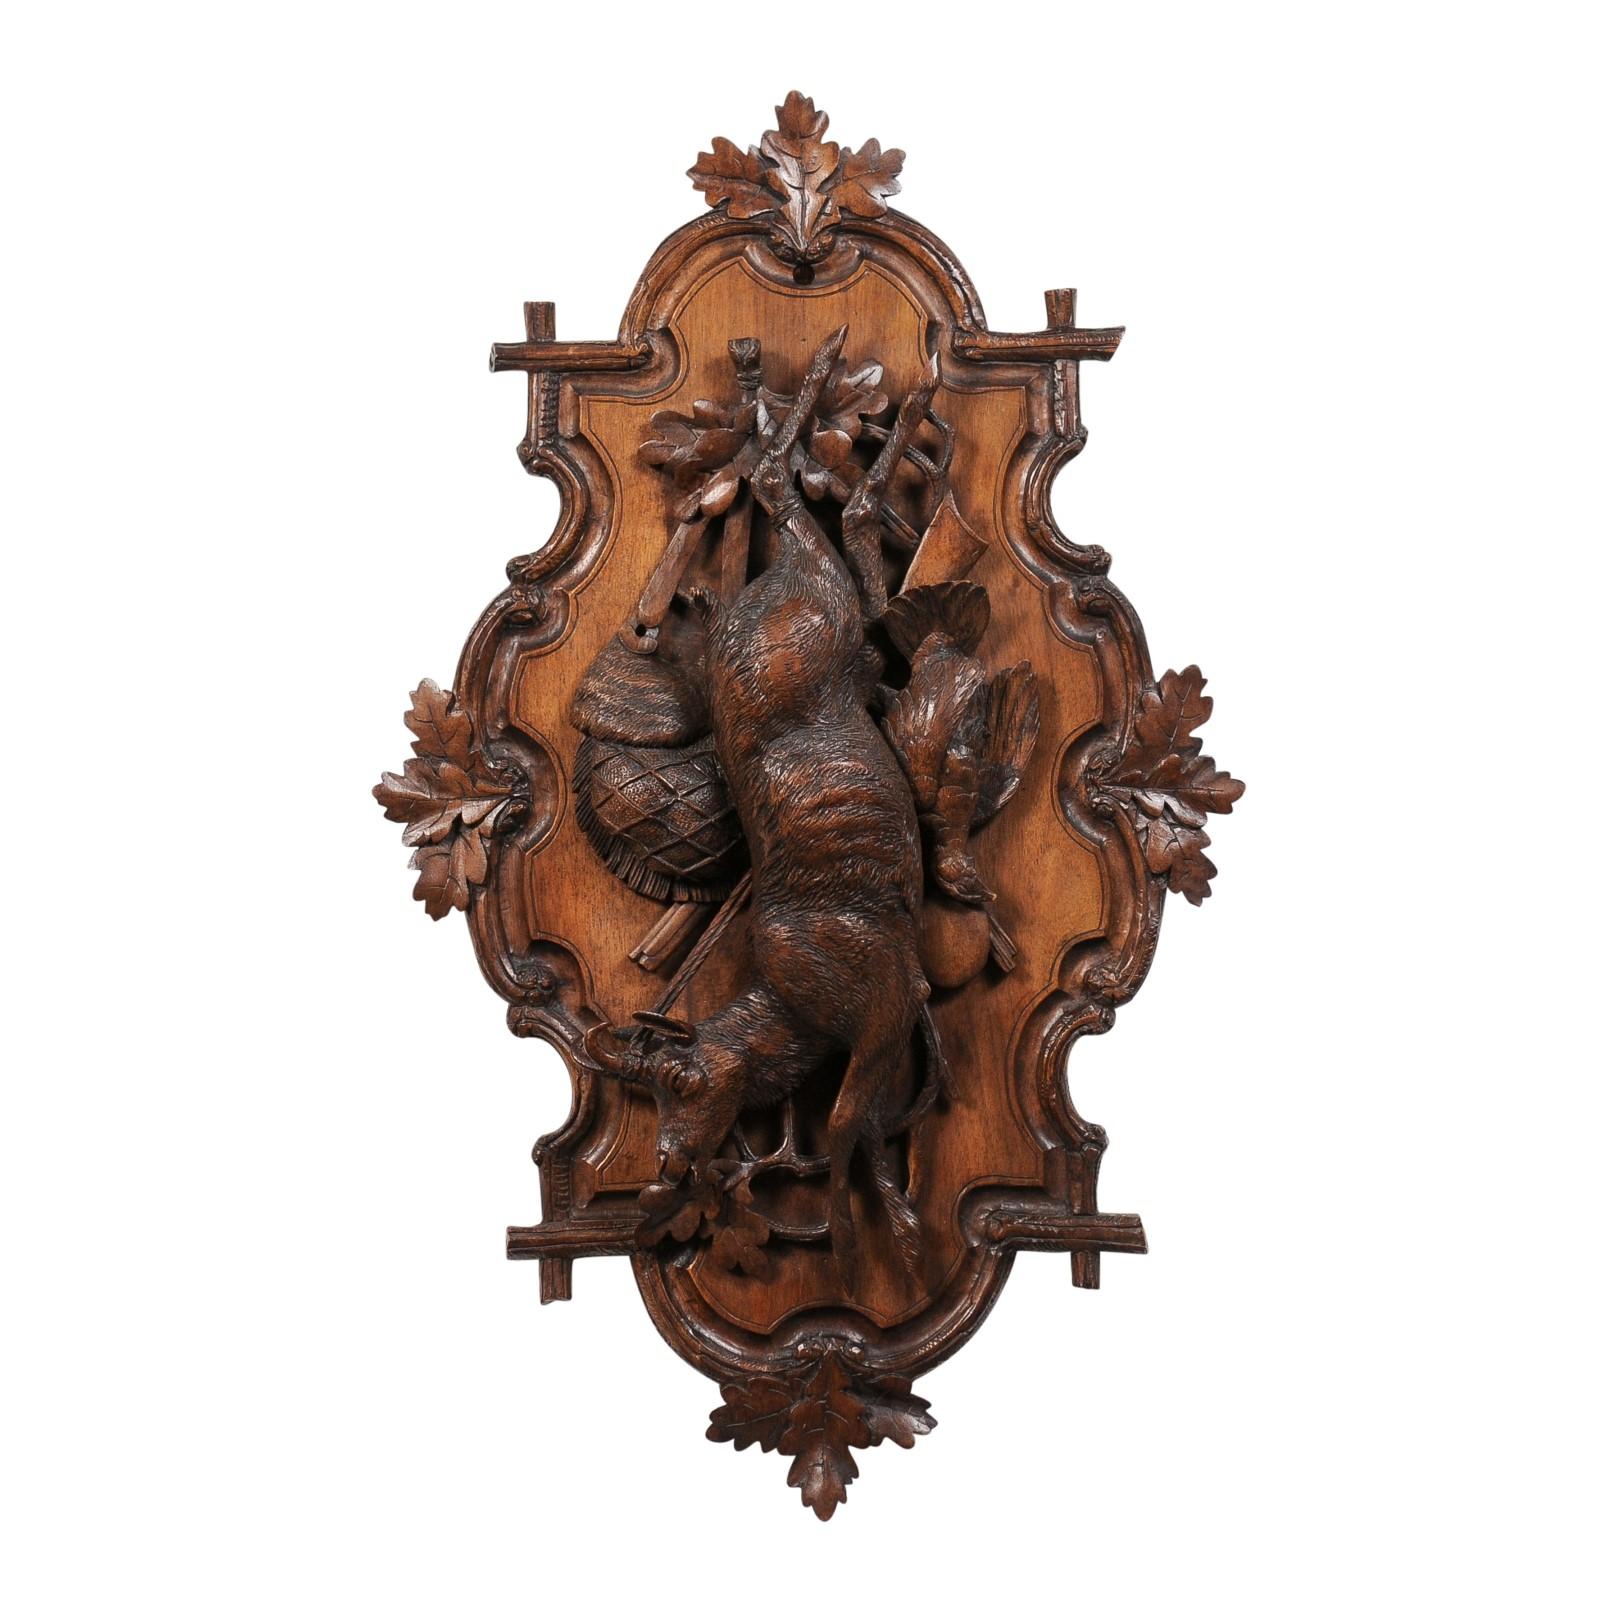 A Black Forest period German wall carving from the 19th century depicting a hunting trophy. A striking relic from the 19th century, this Black Forest period German wall carving serves as a tangible bridge between history and the modern-day art